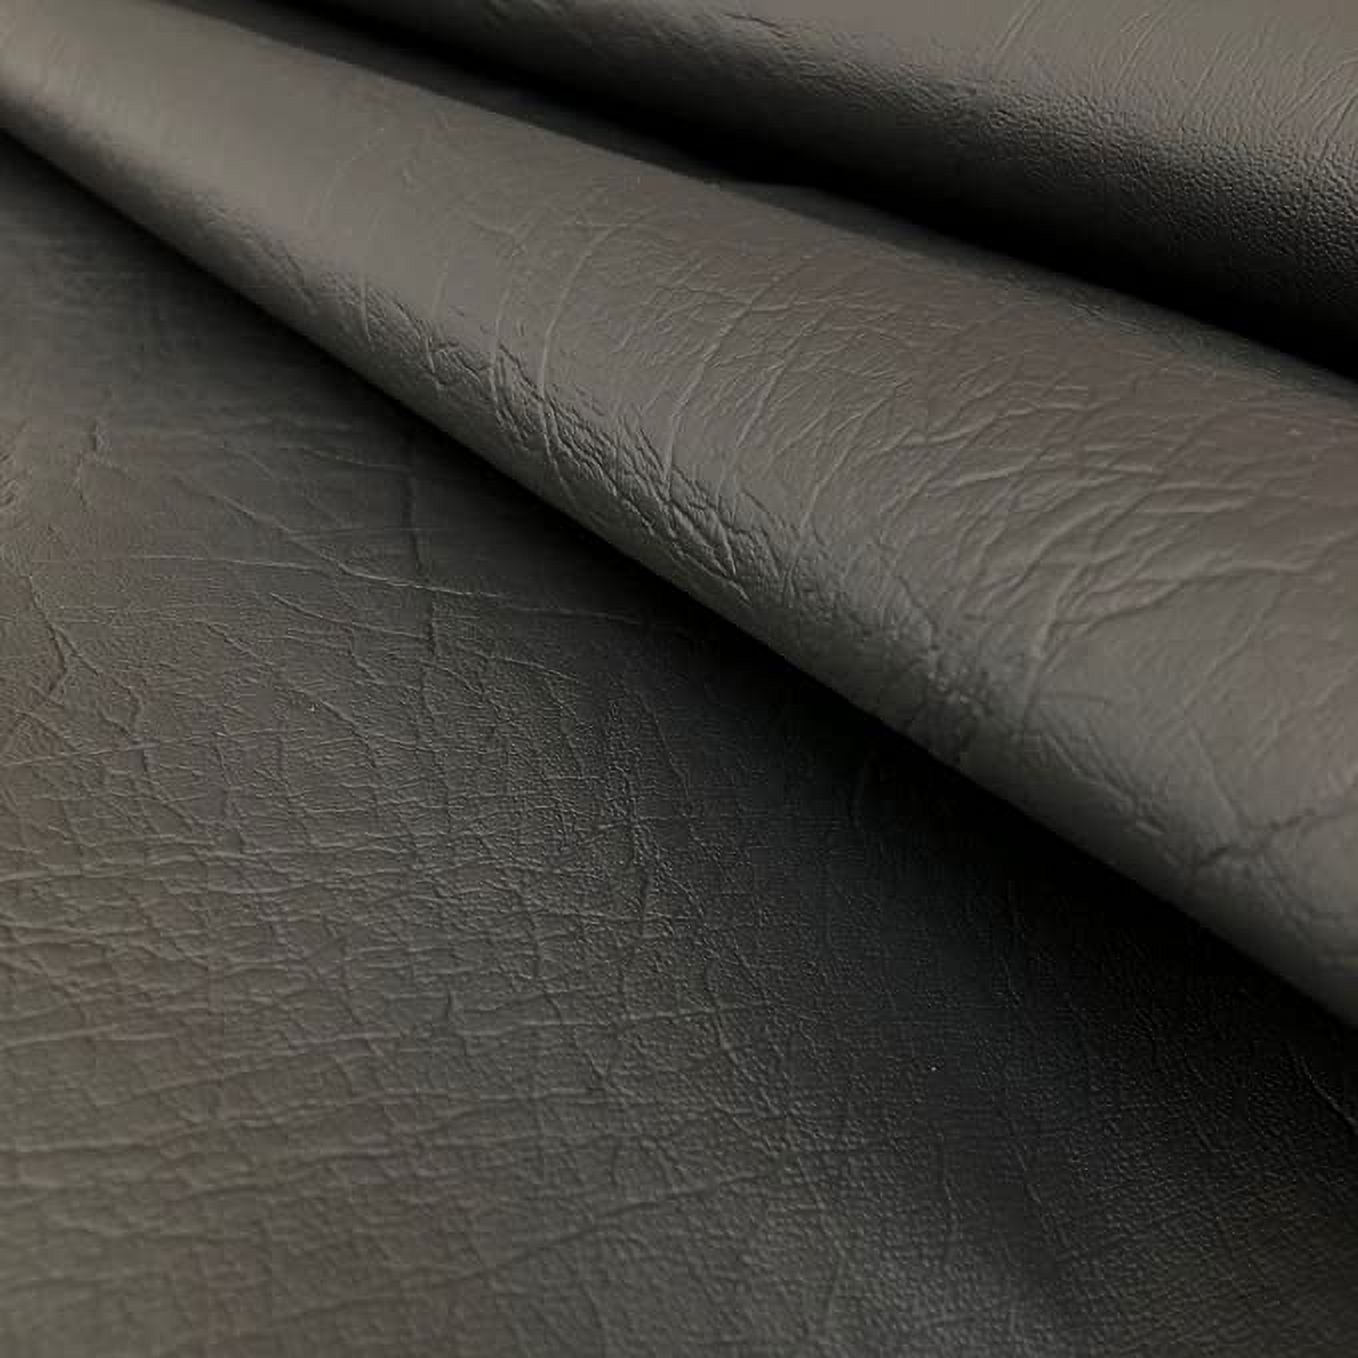 Faux Leather Sheets Soft Leather Fabric Upholstery Faux Leather Material  0.5mm Pleather Marine Vinyl Fabric for Sofa,Car Seat,Furniture  Sew,Cover,DIY